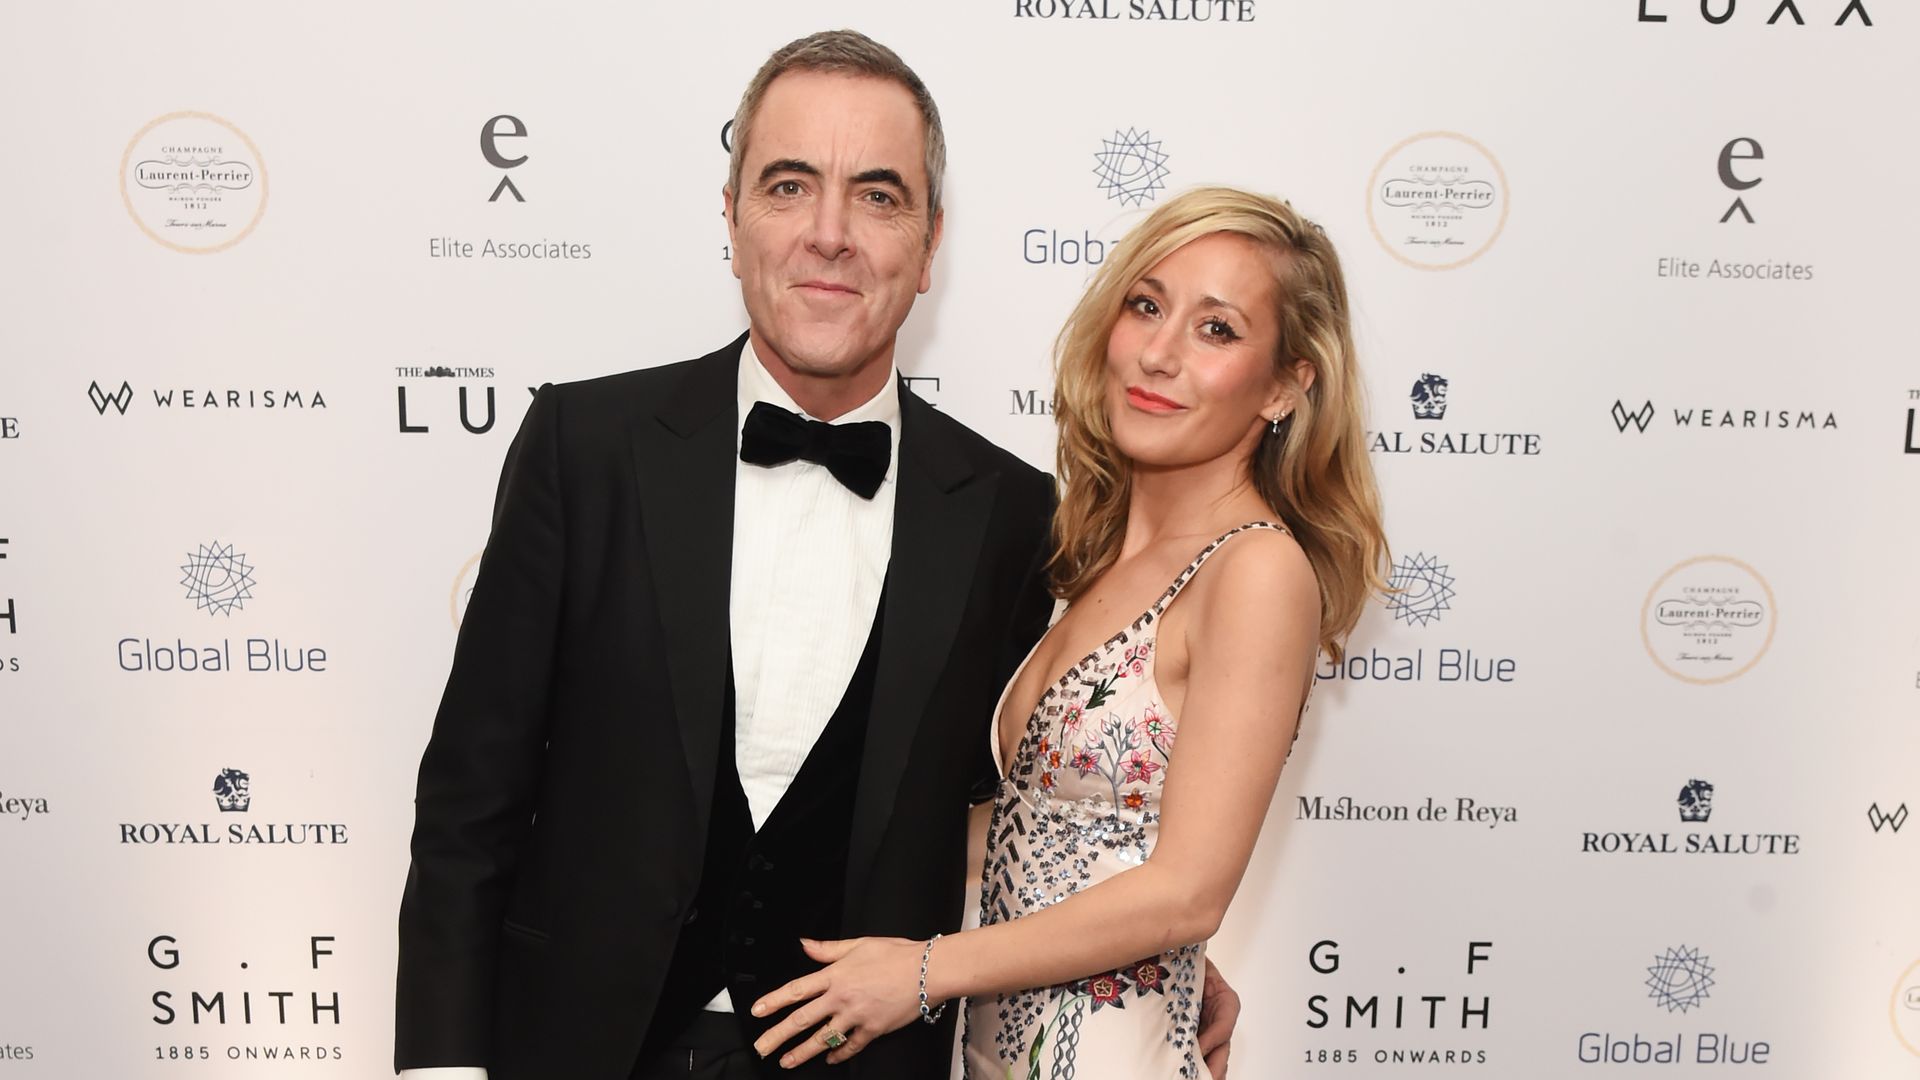 James Nesbitt in a tuxedo standing with Katy Gleadhill in a white floral dress